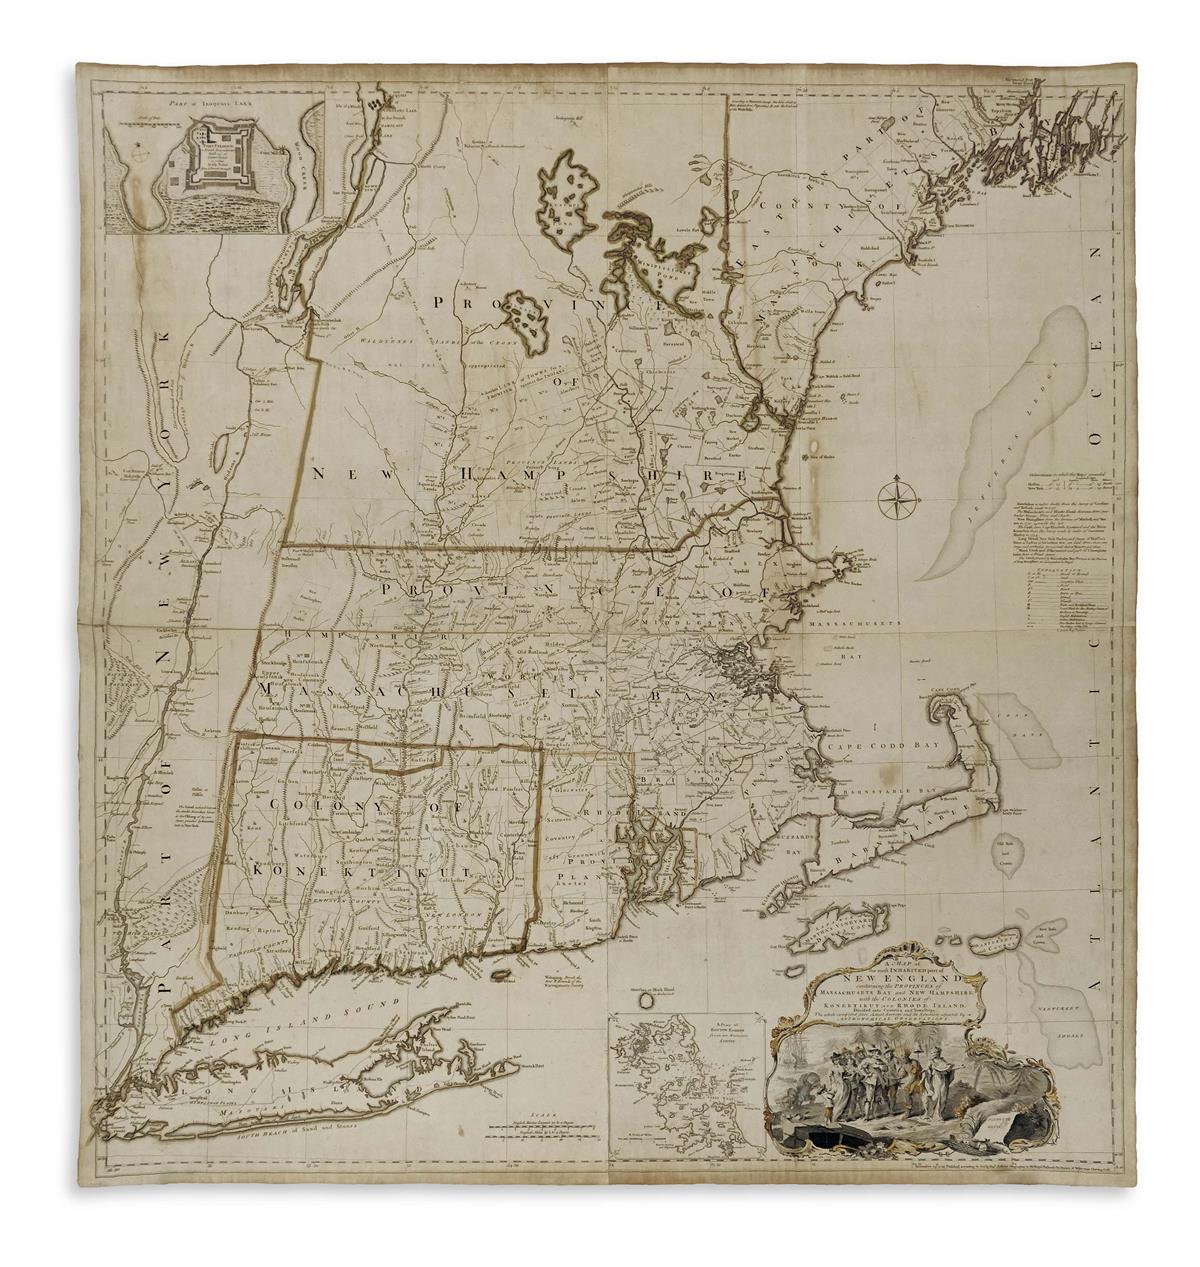 MEAD, BRADDOCK, alias GREEN, JOHN. A Map of the Most Inhabited Part of New England